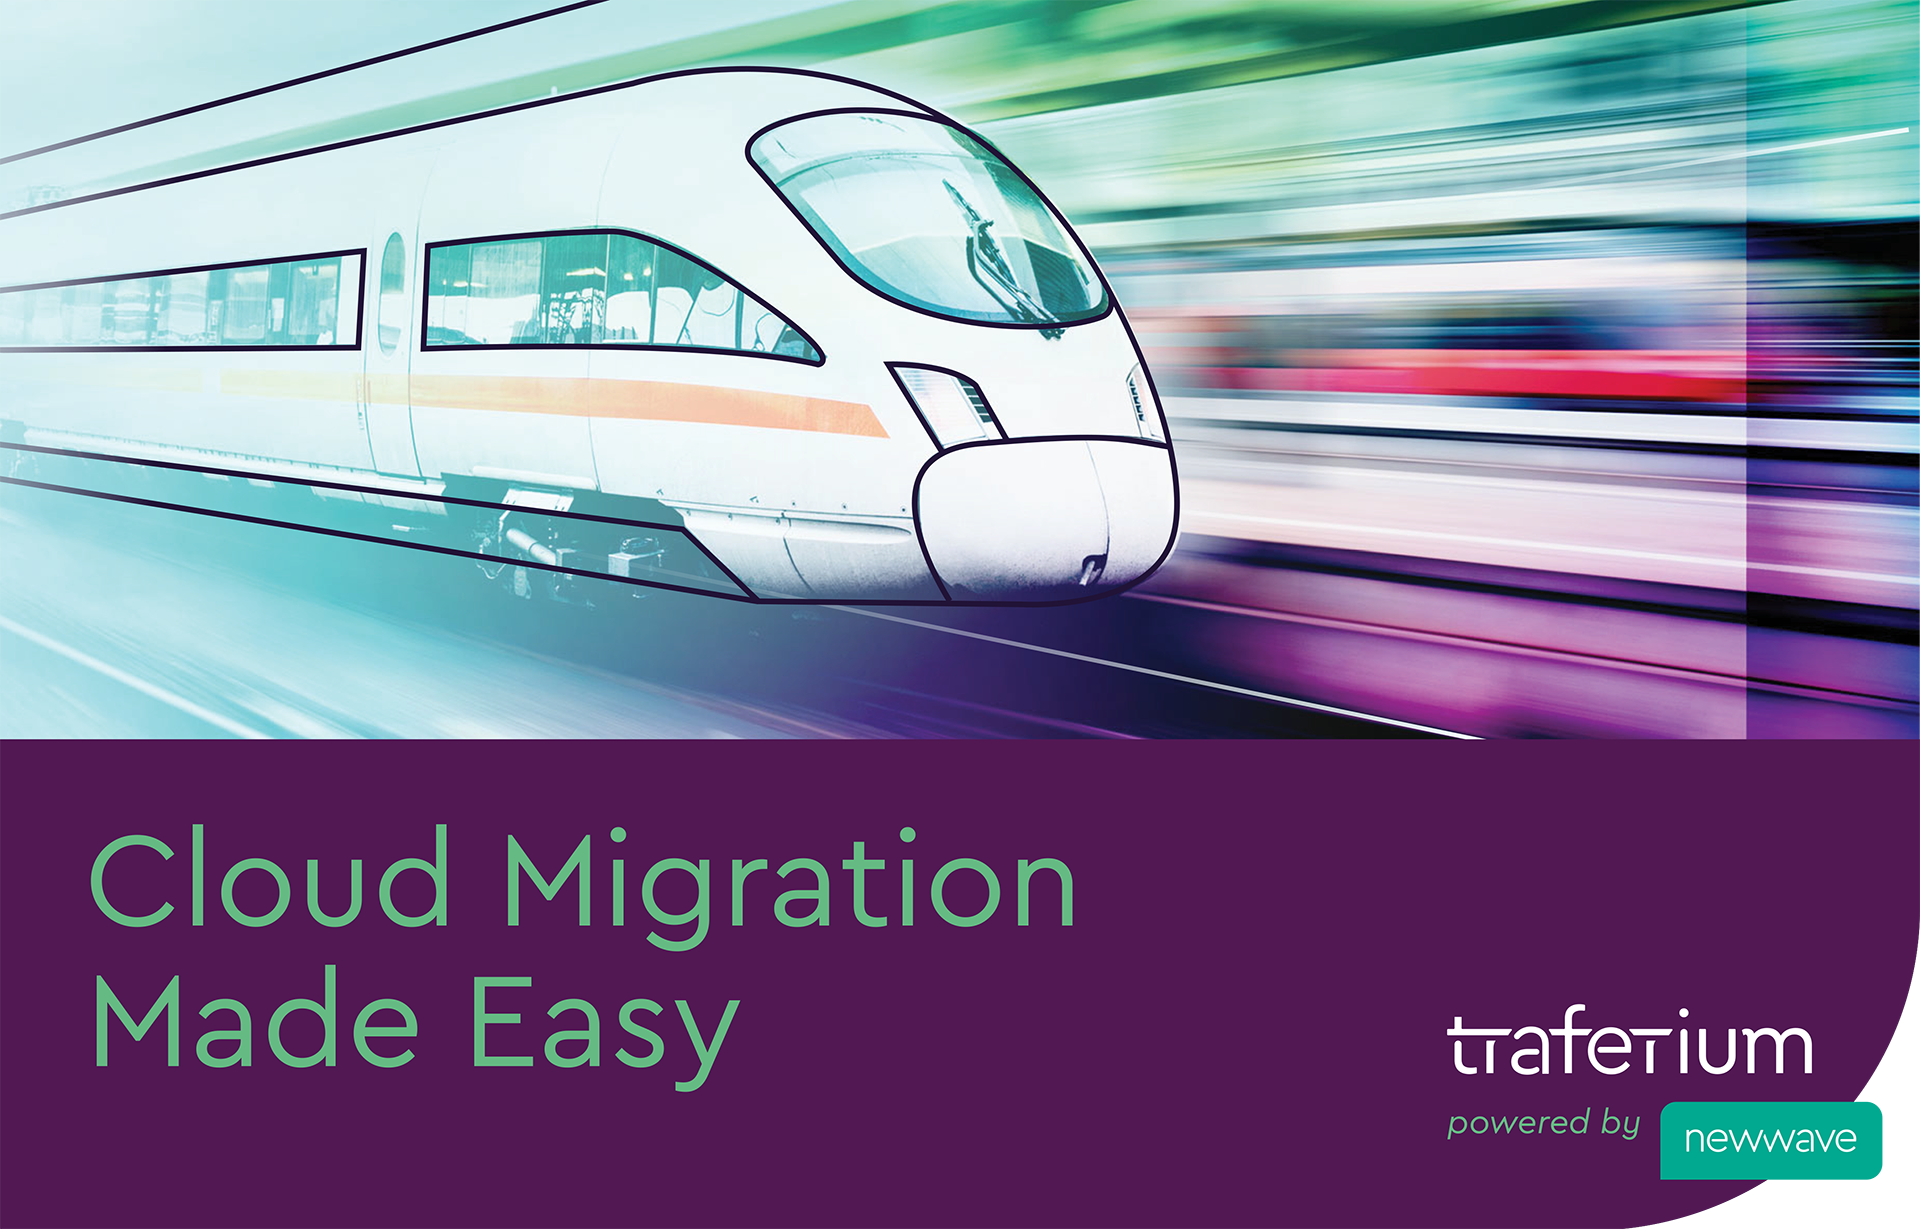 Traferium: Key to Successfully Migrating Data to the Cloud